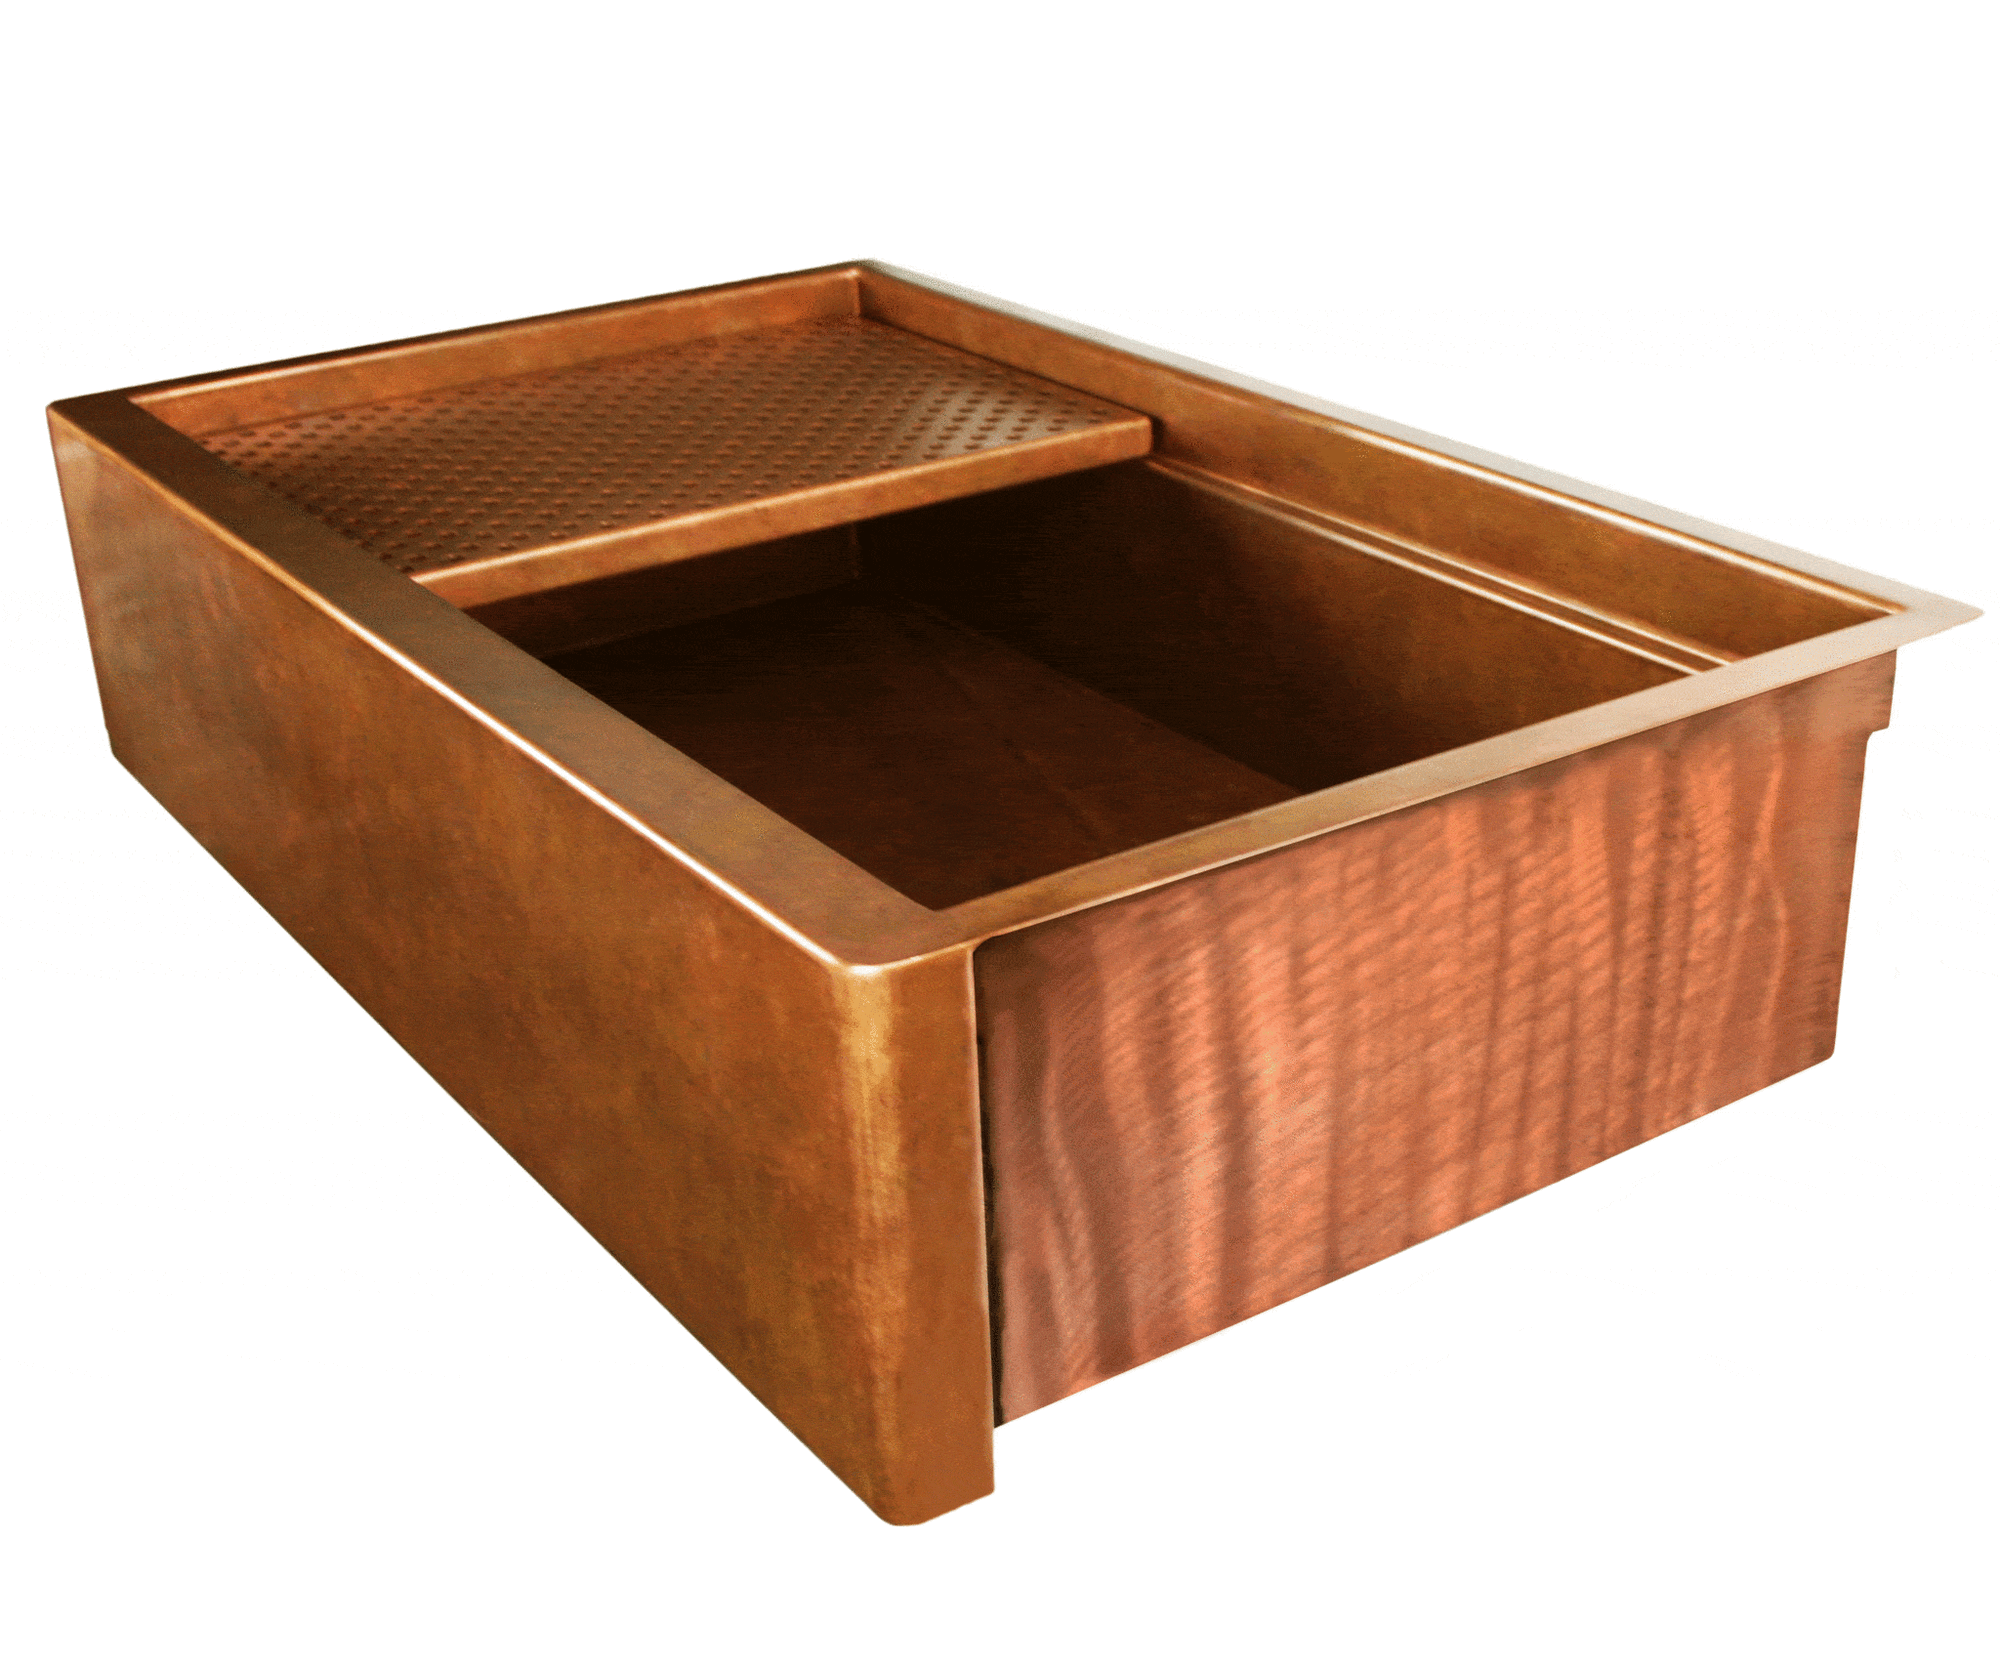 Copper farmer sink with a prominent apron front made from 14 gauge smooth copper.